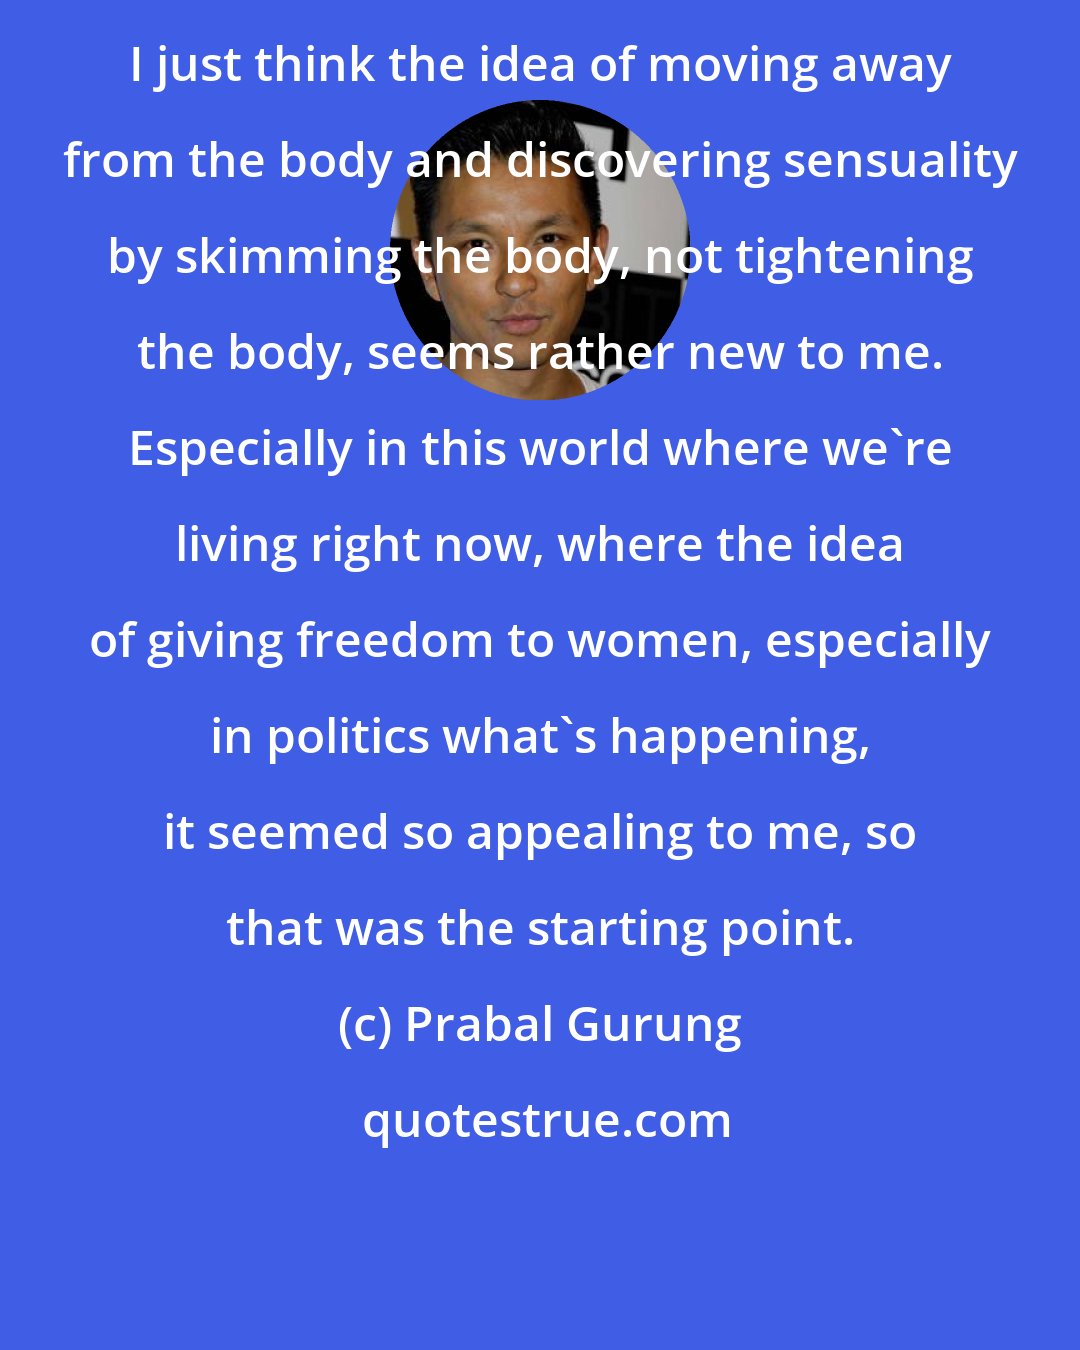 Prabal Gurung: I just think the idea of moving away from the body and discovering sensuality by skimming the body, not tightening the body, seems rather new to me. Especially in this world where we're living right now, where the idea of giving freedom to women, especially in politics what's happening, it seemed so appealing to me, so that was the starting point.